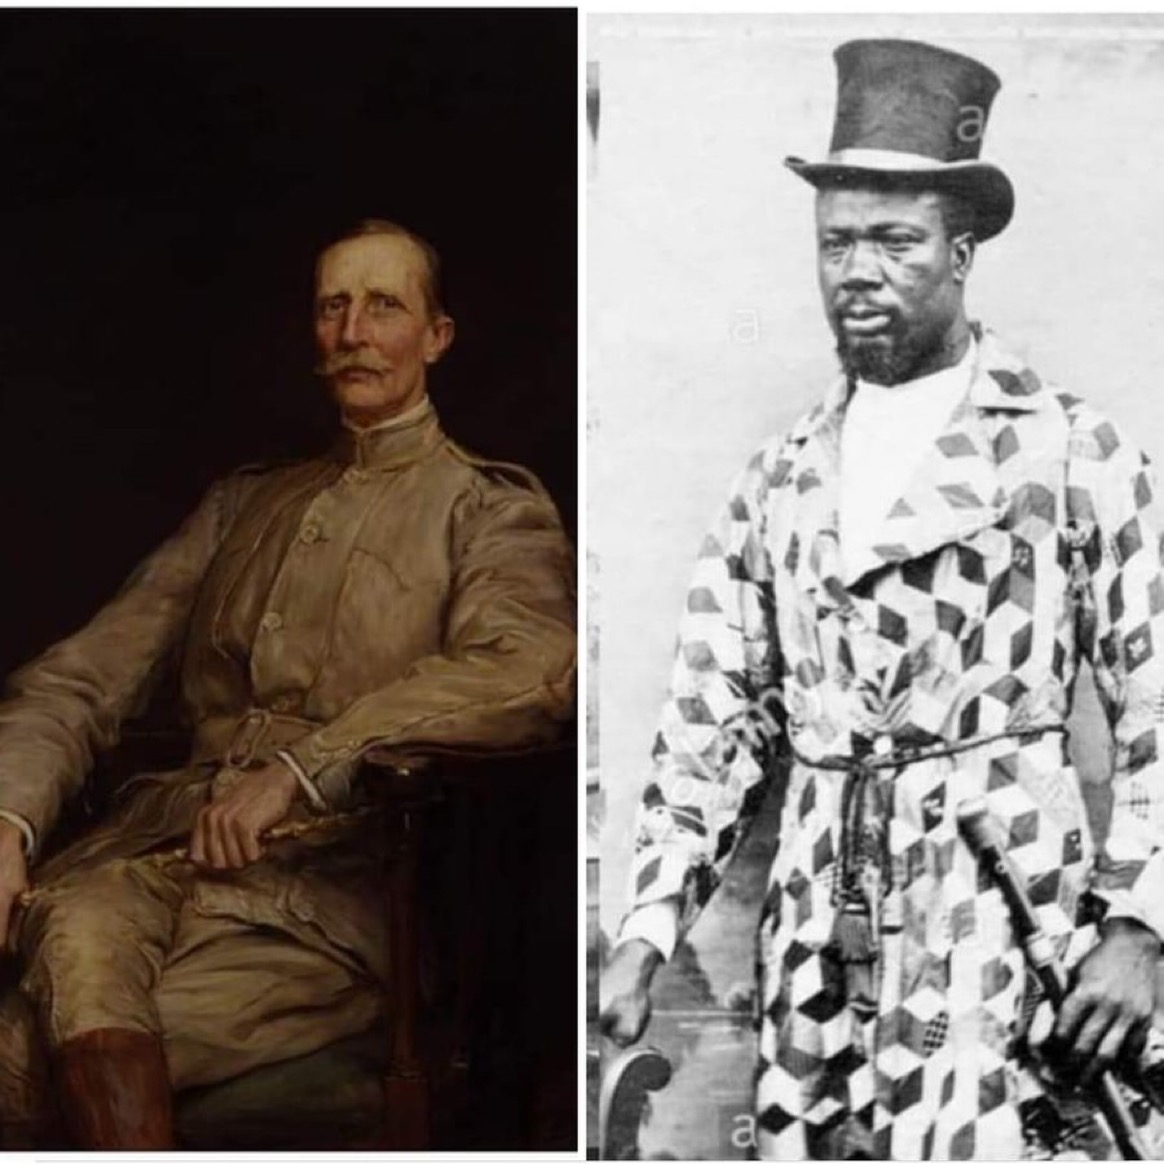 THE STORY OF THE MAN WHO SOLD WHAT IS NOW NIGERIA TO THE BRITISH FOR £865K (pounds) IN 1899 A Thread 🧵 Retweet to educate someone